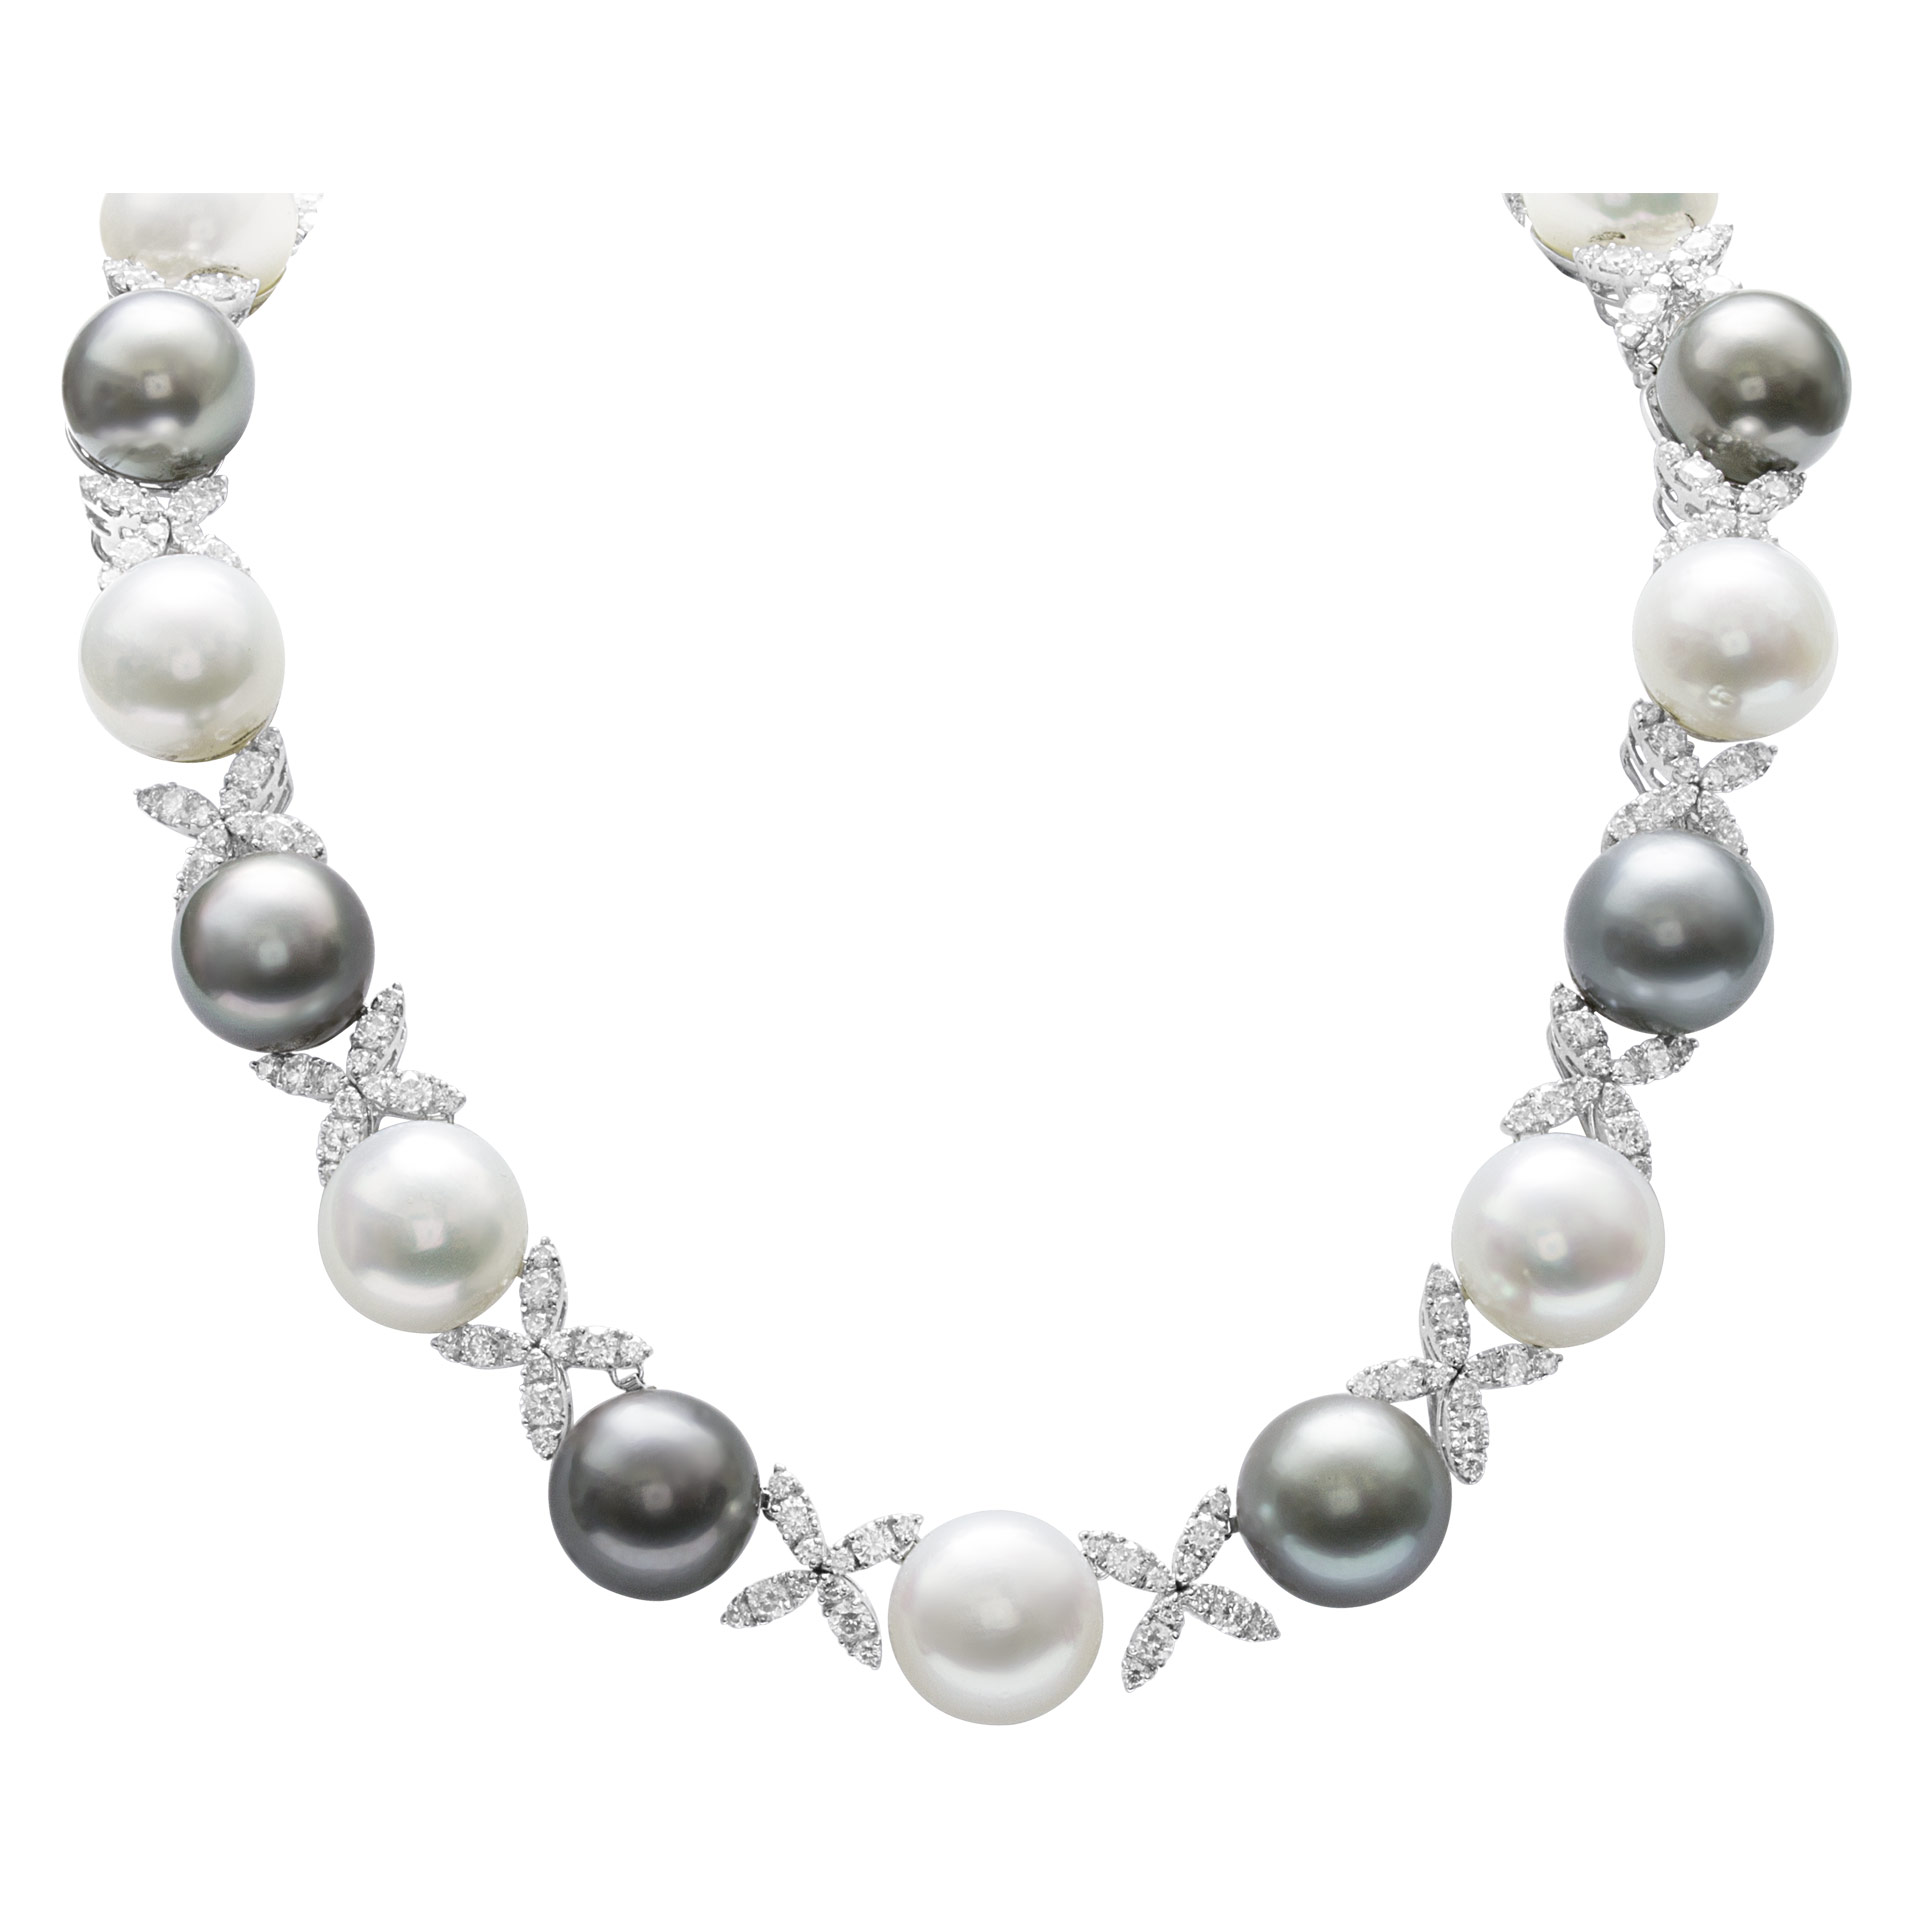 Pearl and diamond necklace with 11.91 cts in diamonds. image 2